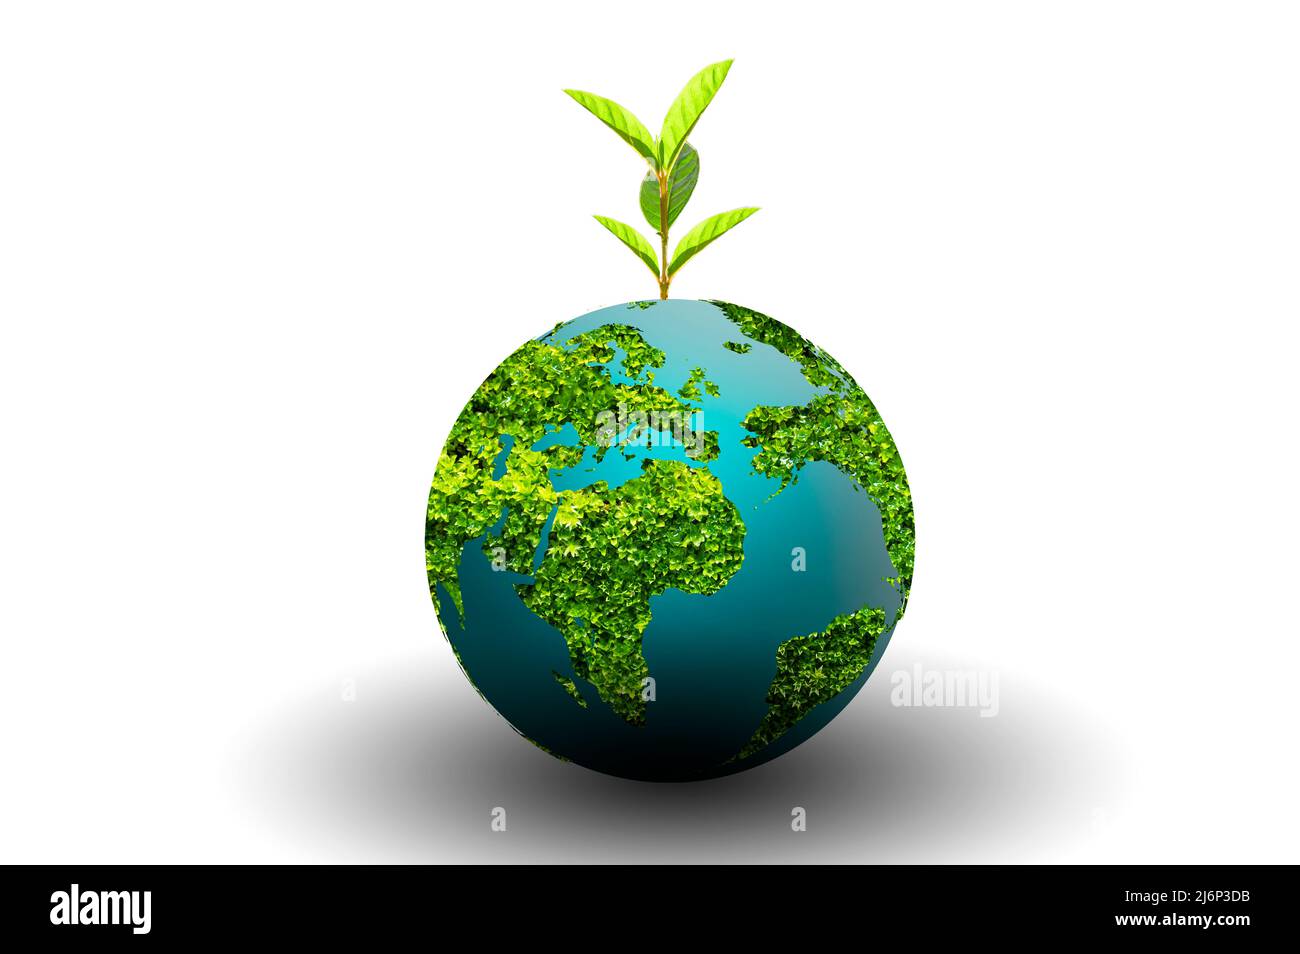 earth day tree on green earth on white isolate background Stock Photo